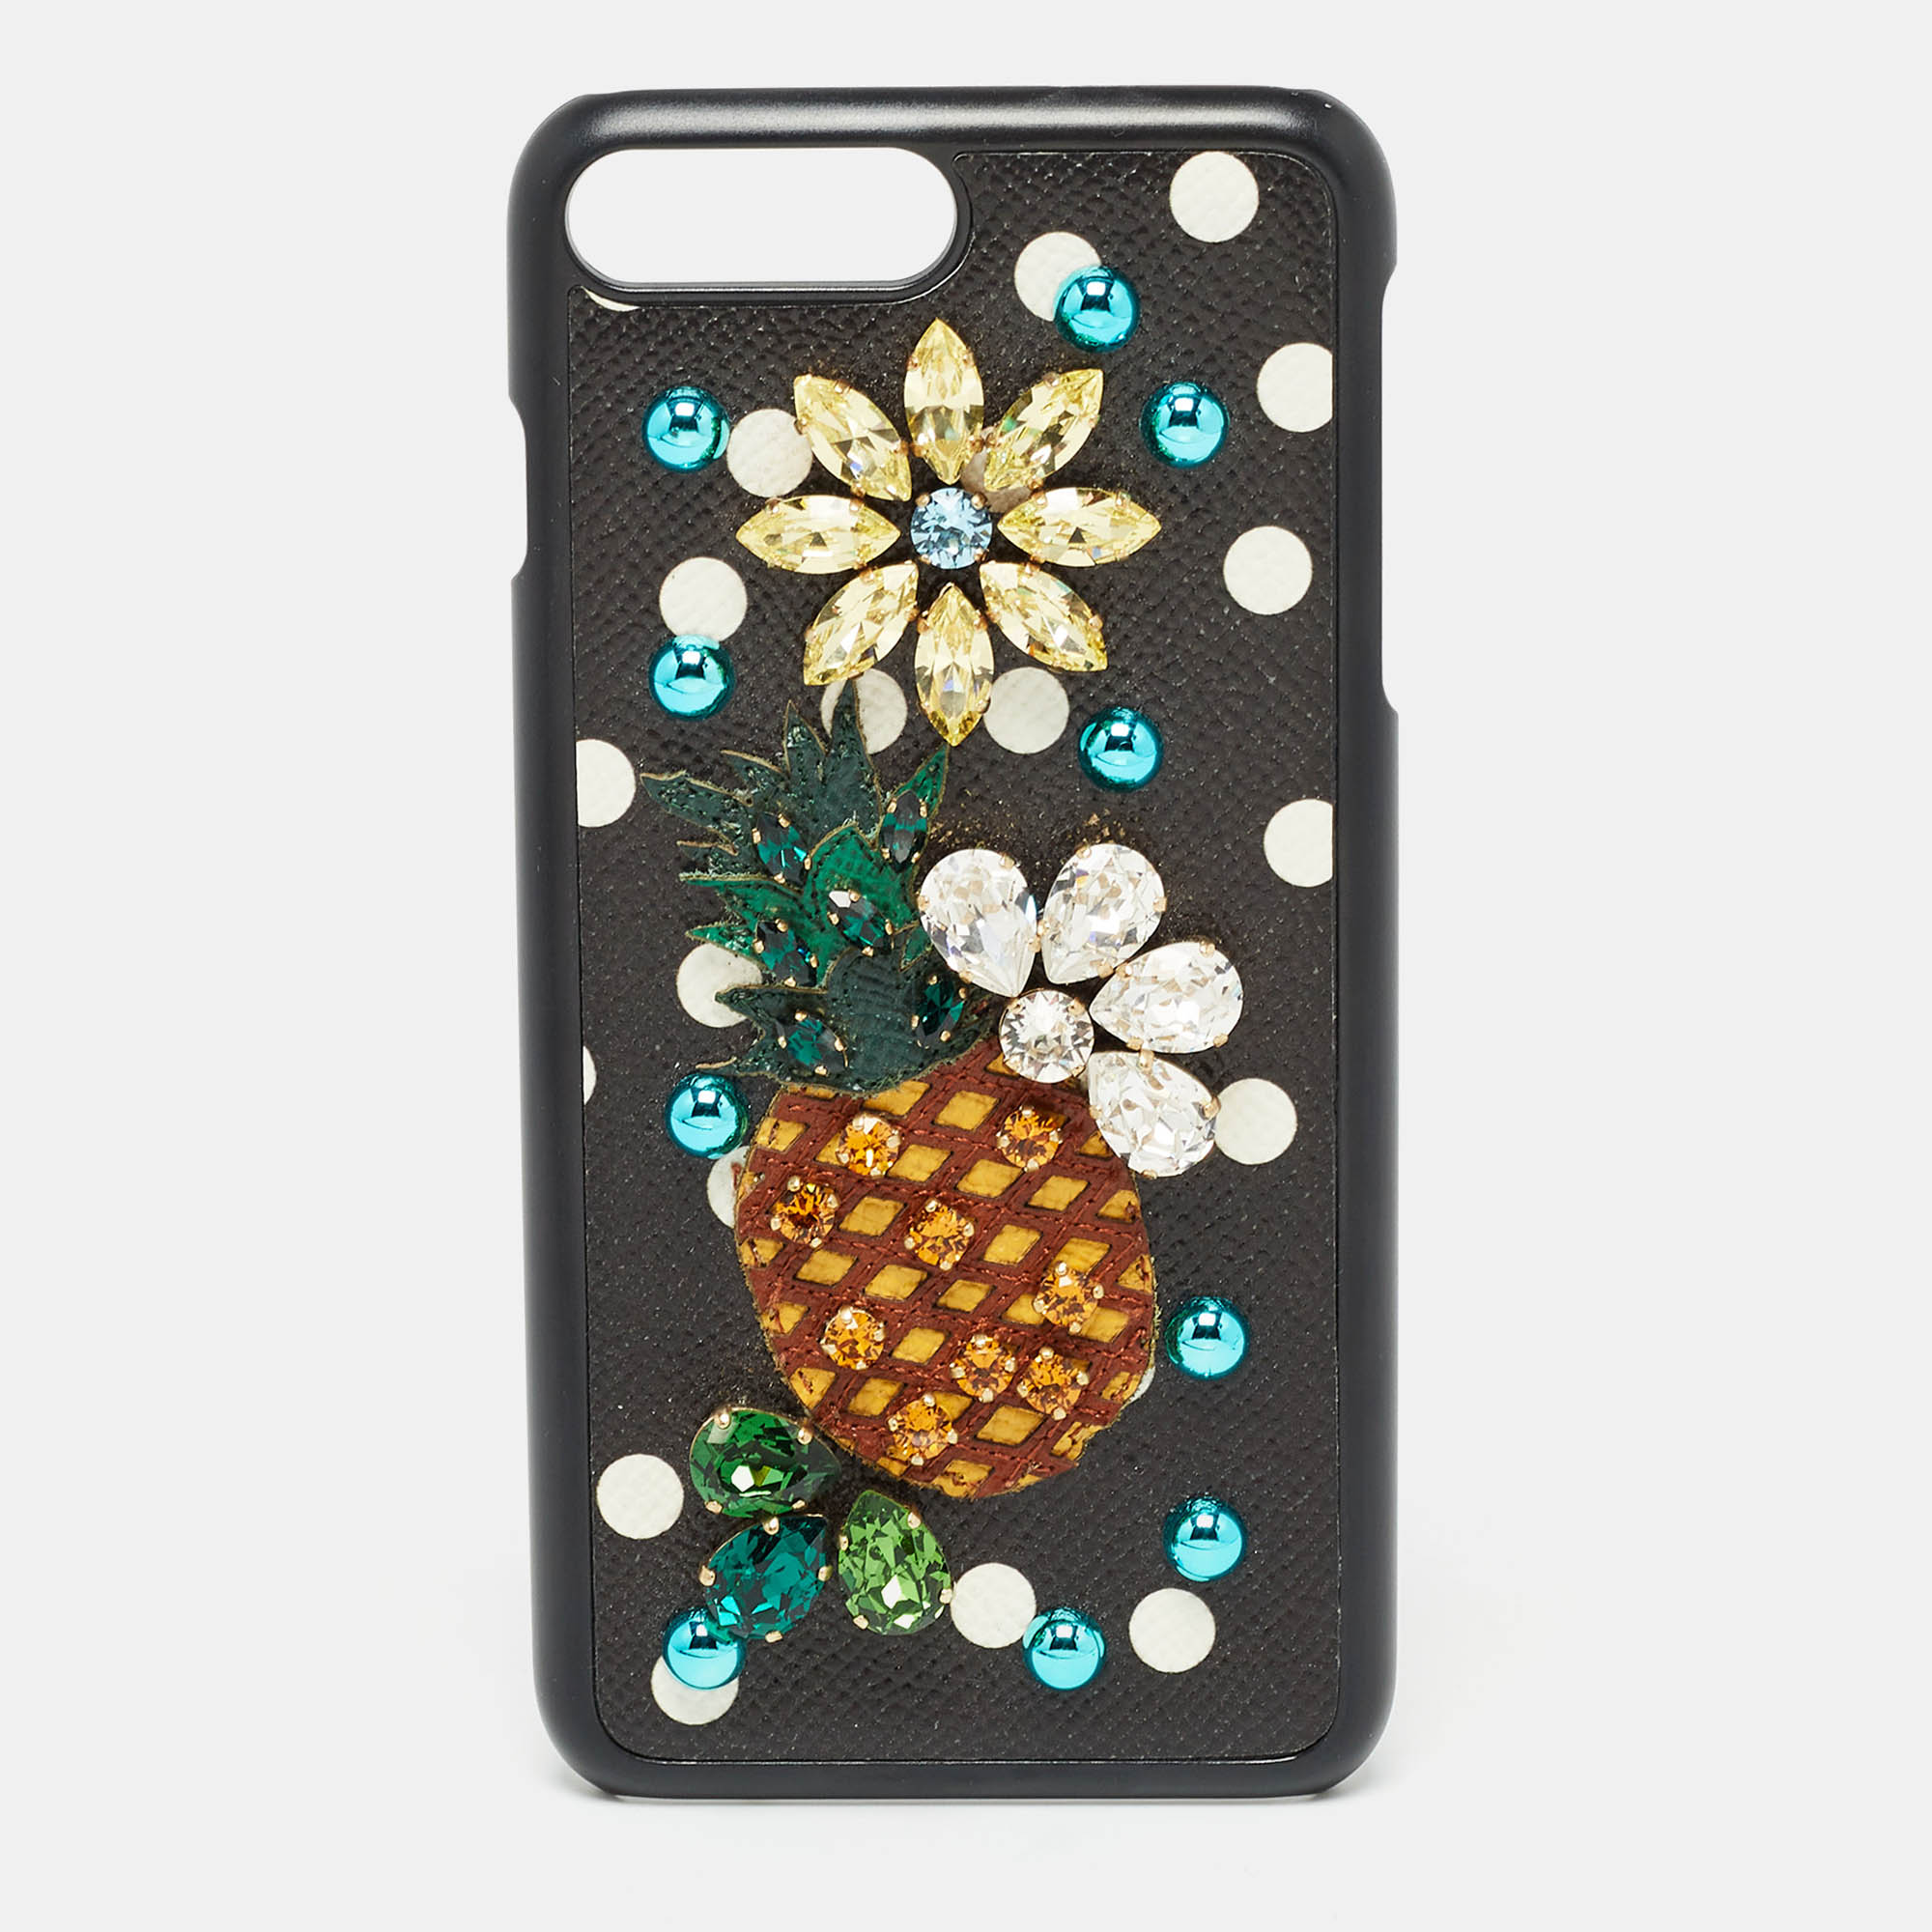 

Dolce & Gabbana Pineapple Crystals Leather iPhone 6/6s Plus Cover, Black